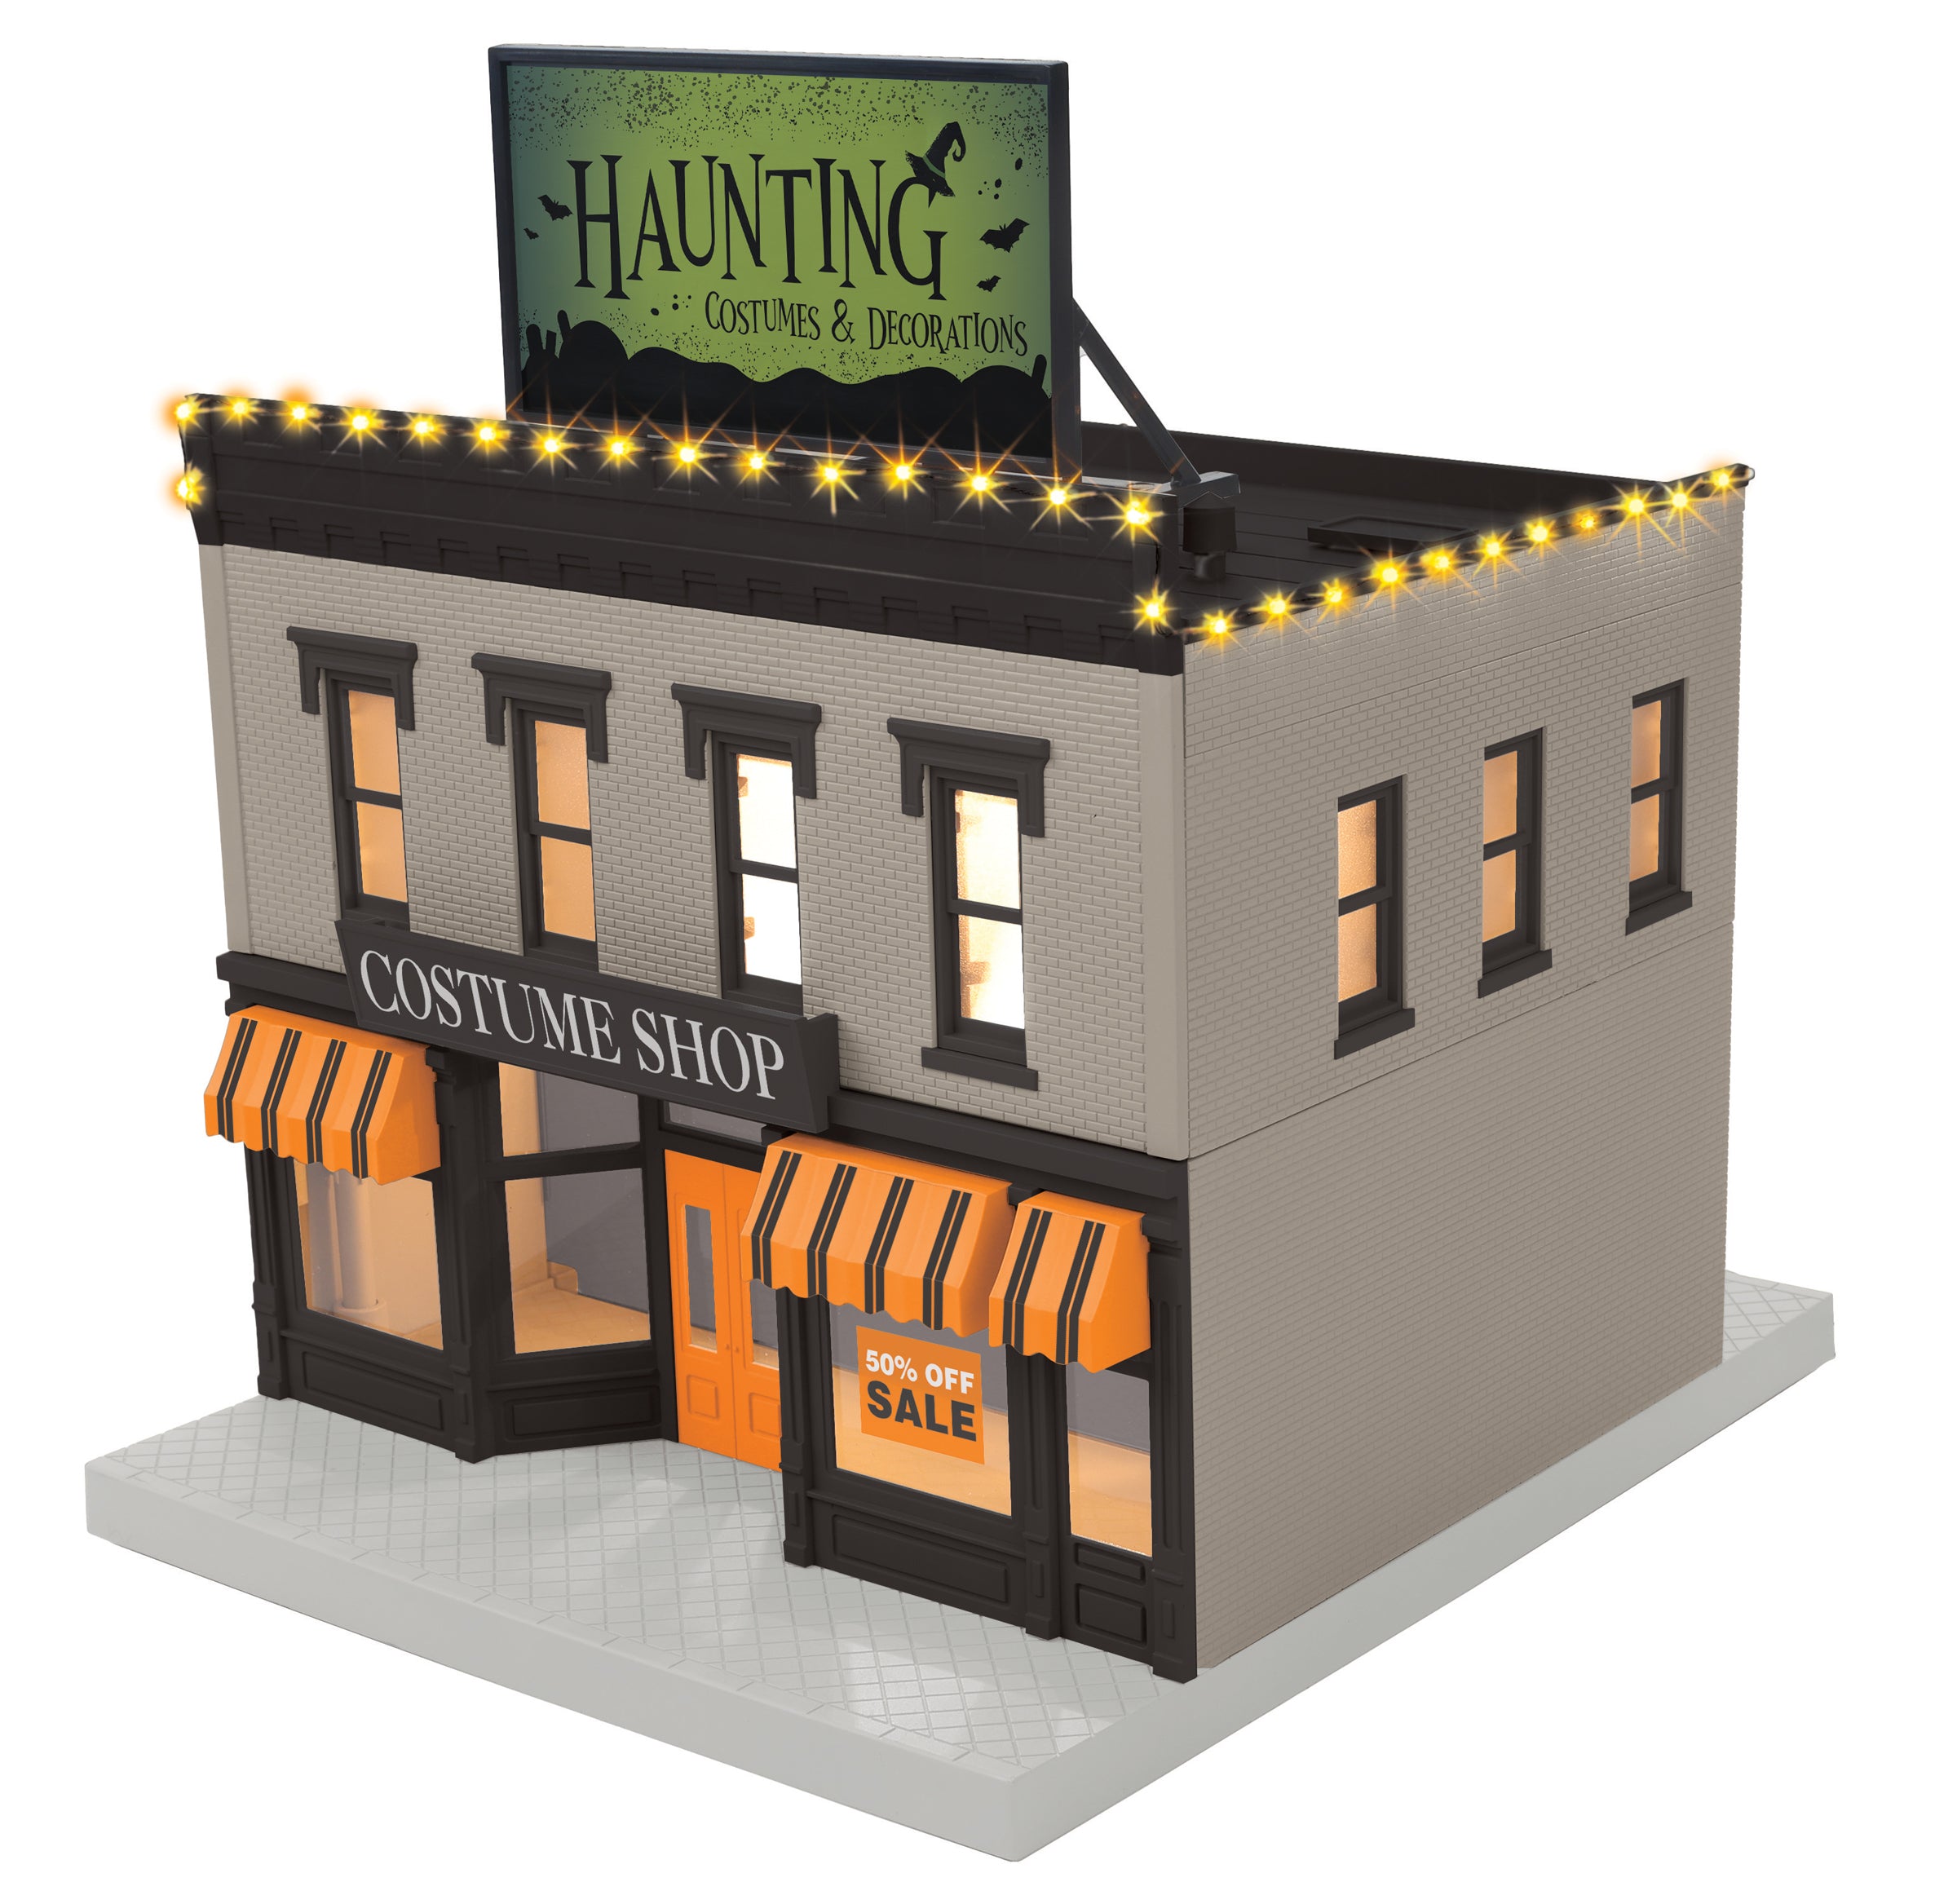 MTH 30-90682 - 2-Story City Building 1 "Halloween" w/ LEDs (Haunting Costumes & Decorations)